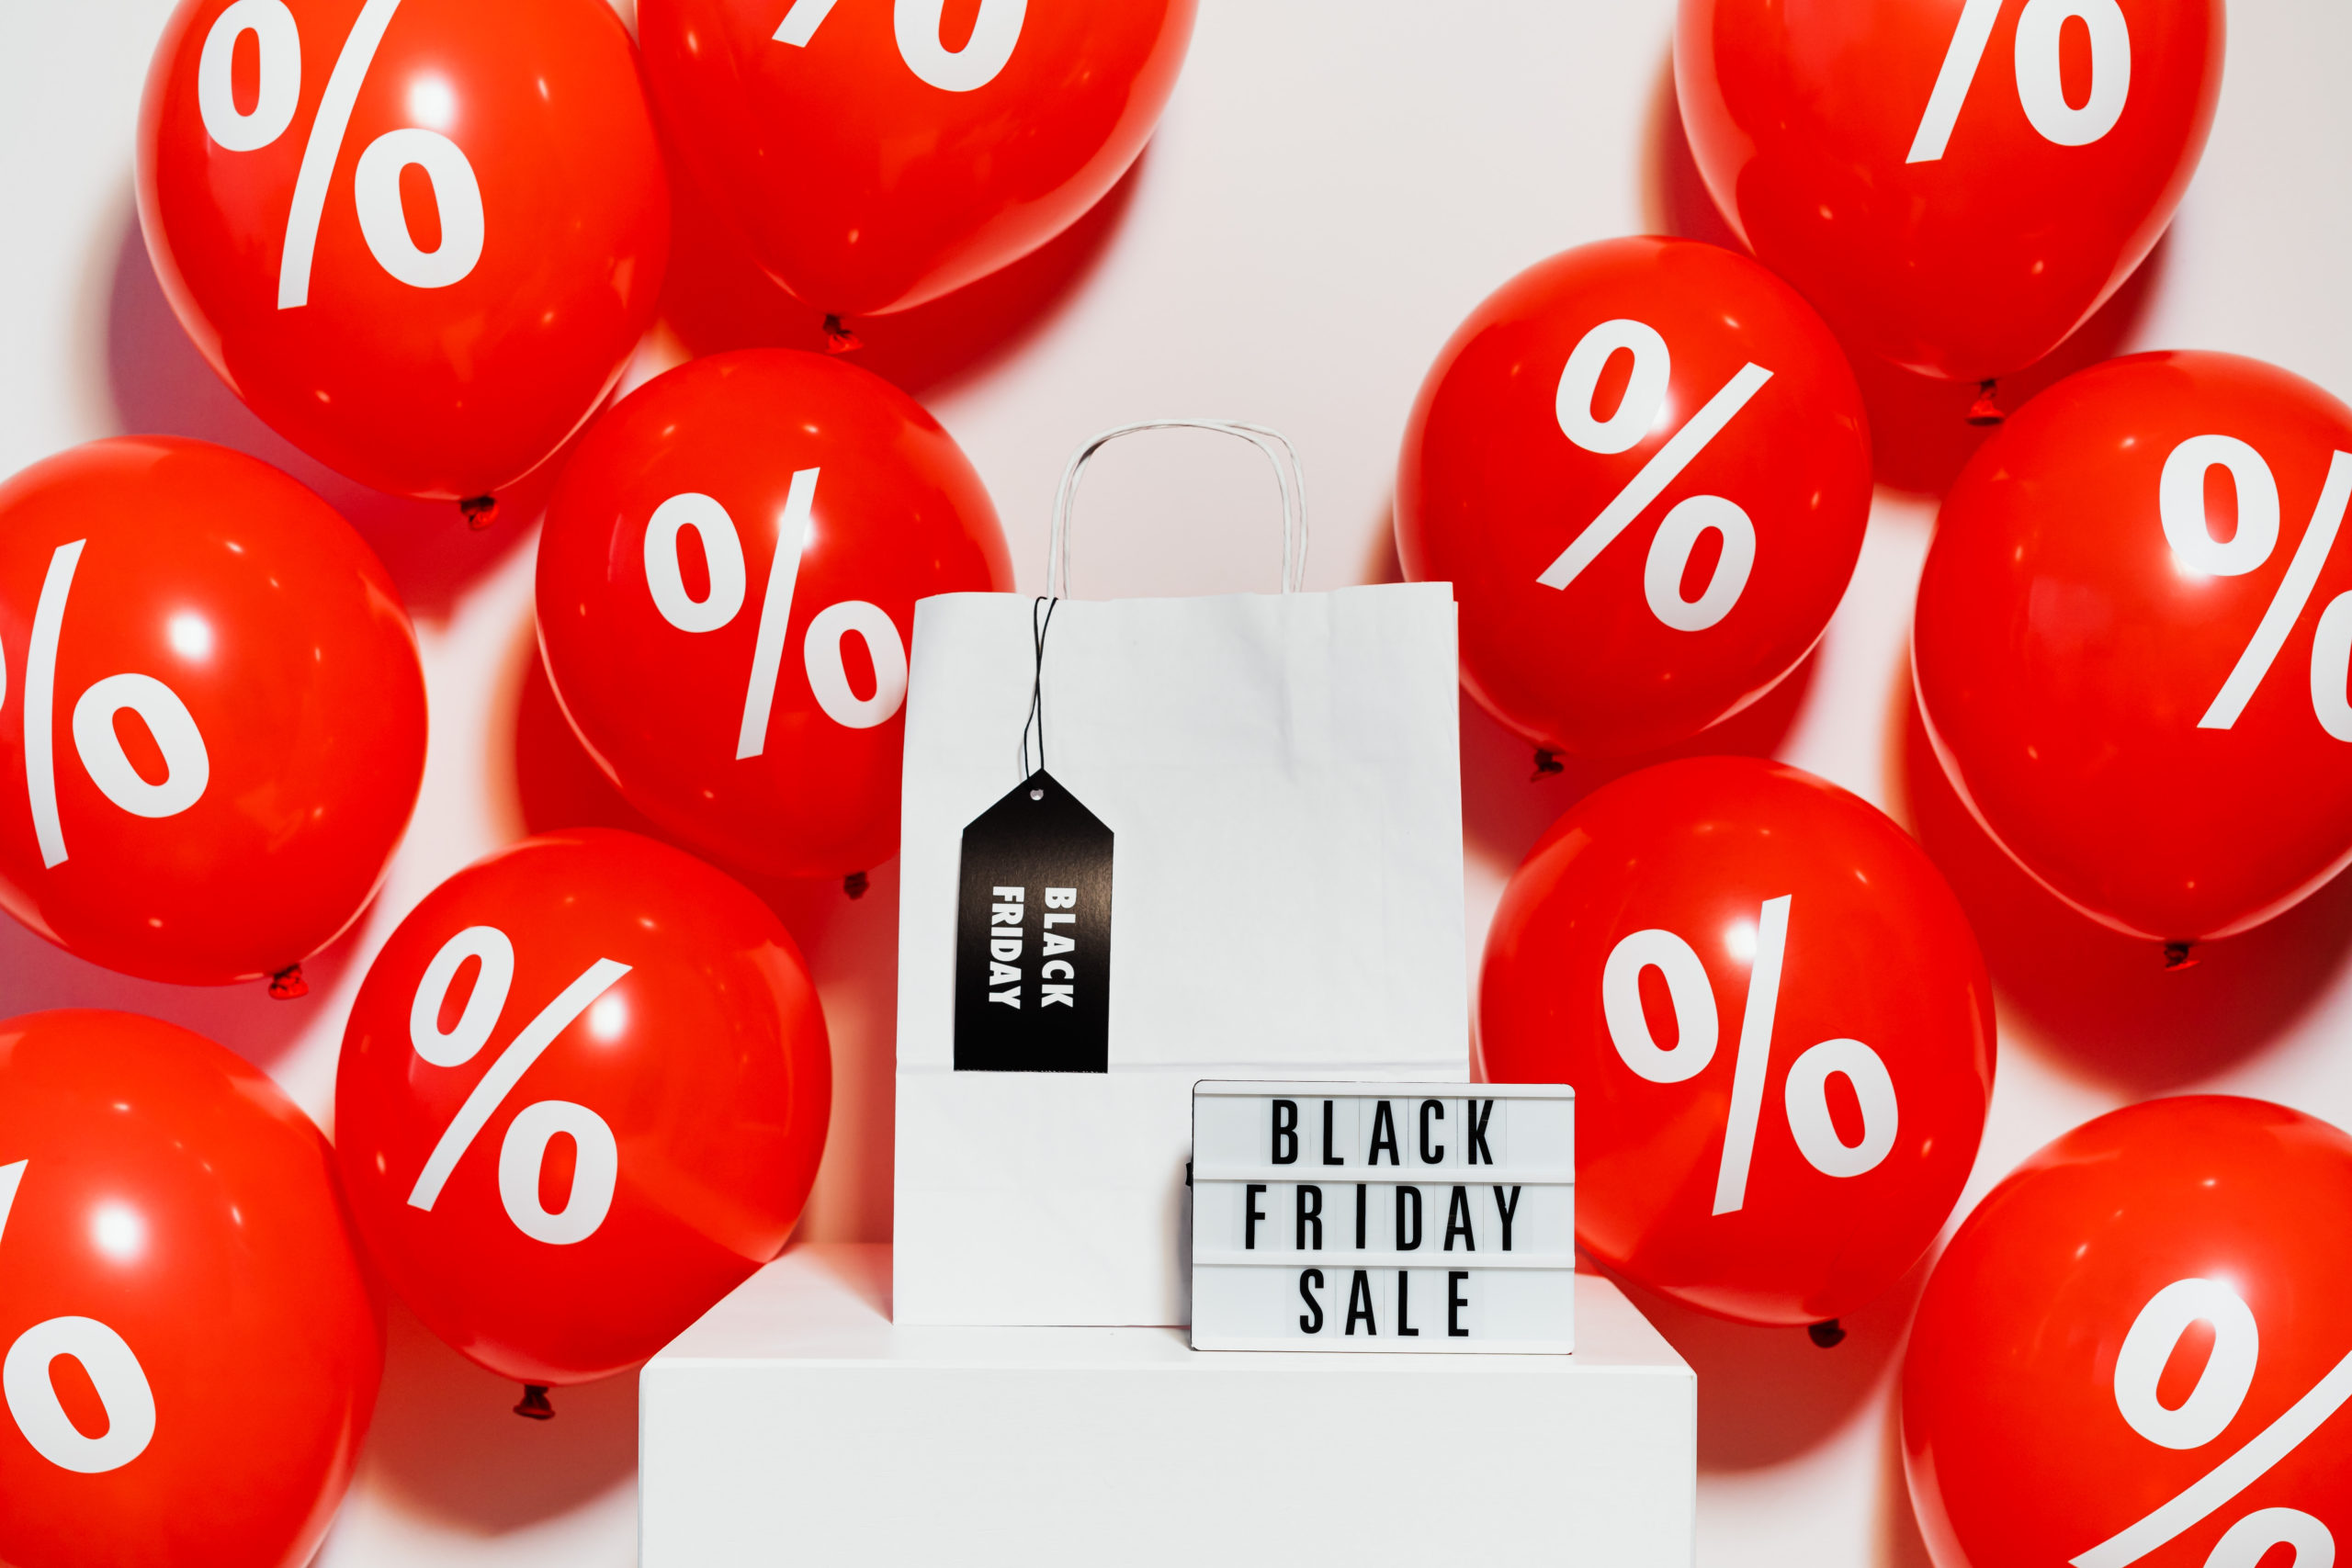 red colored round shaped ball drawn percentage on them beside a tag written black Friday sale on it